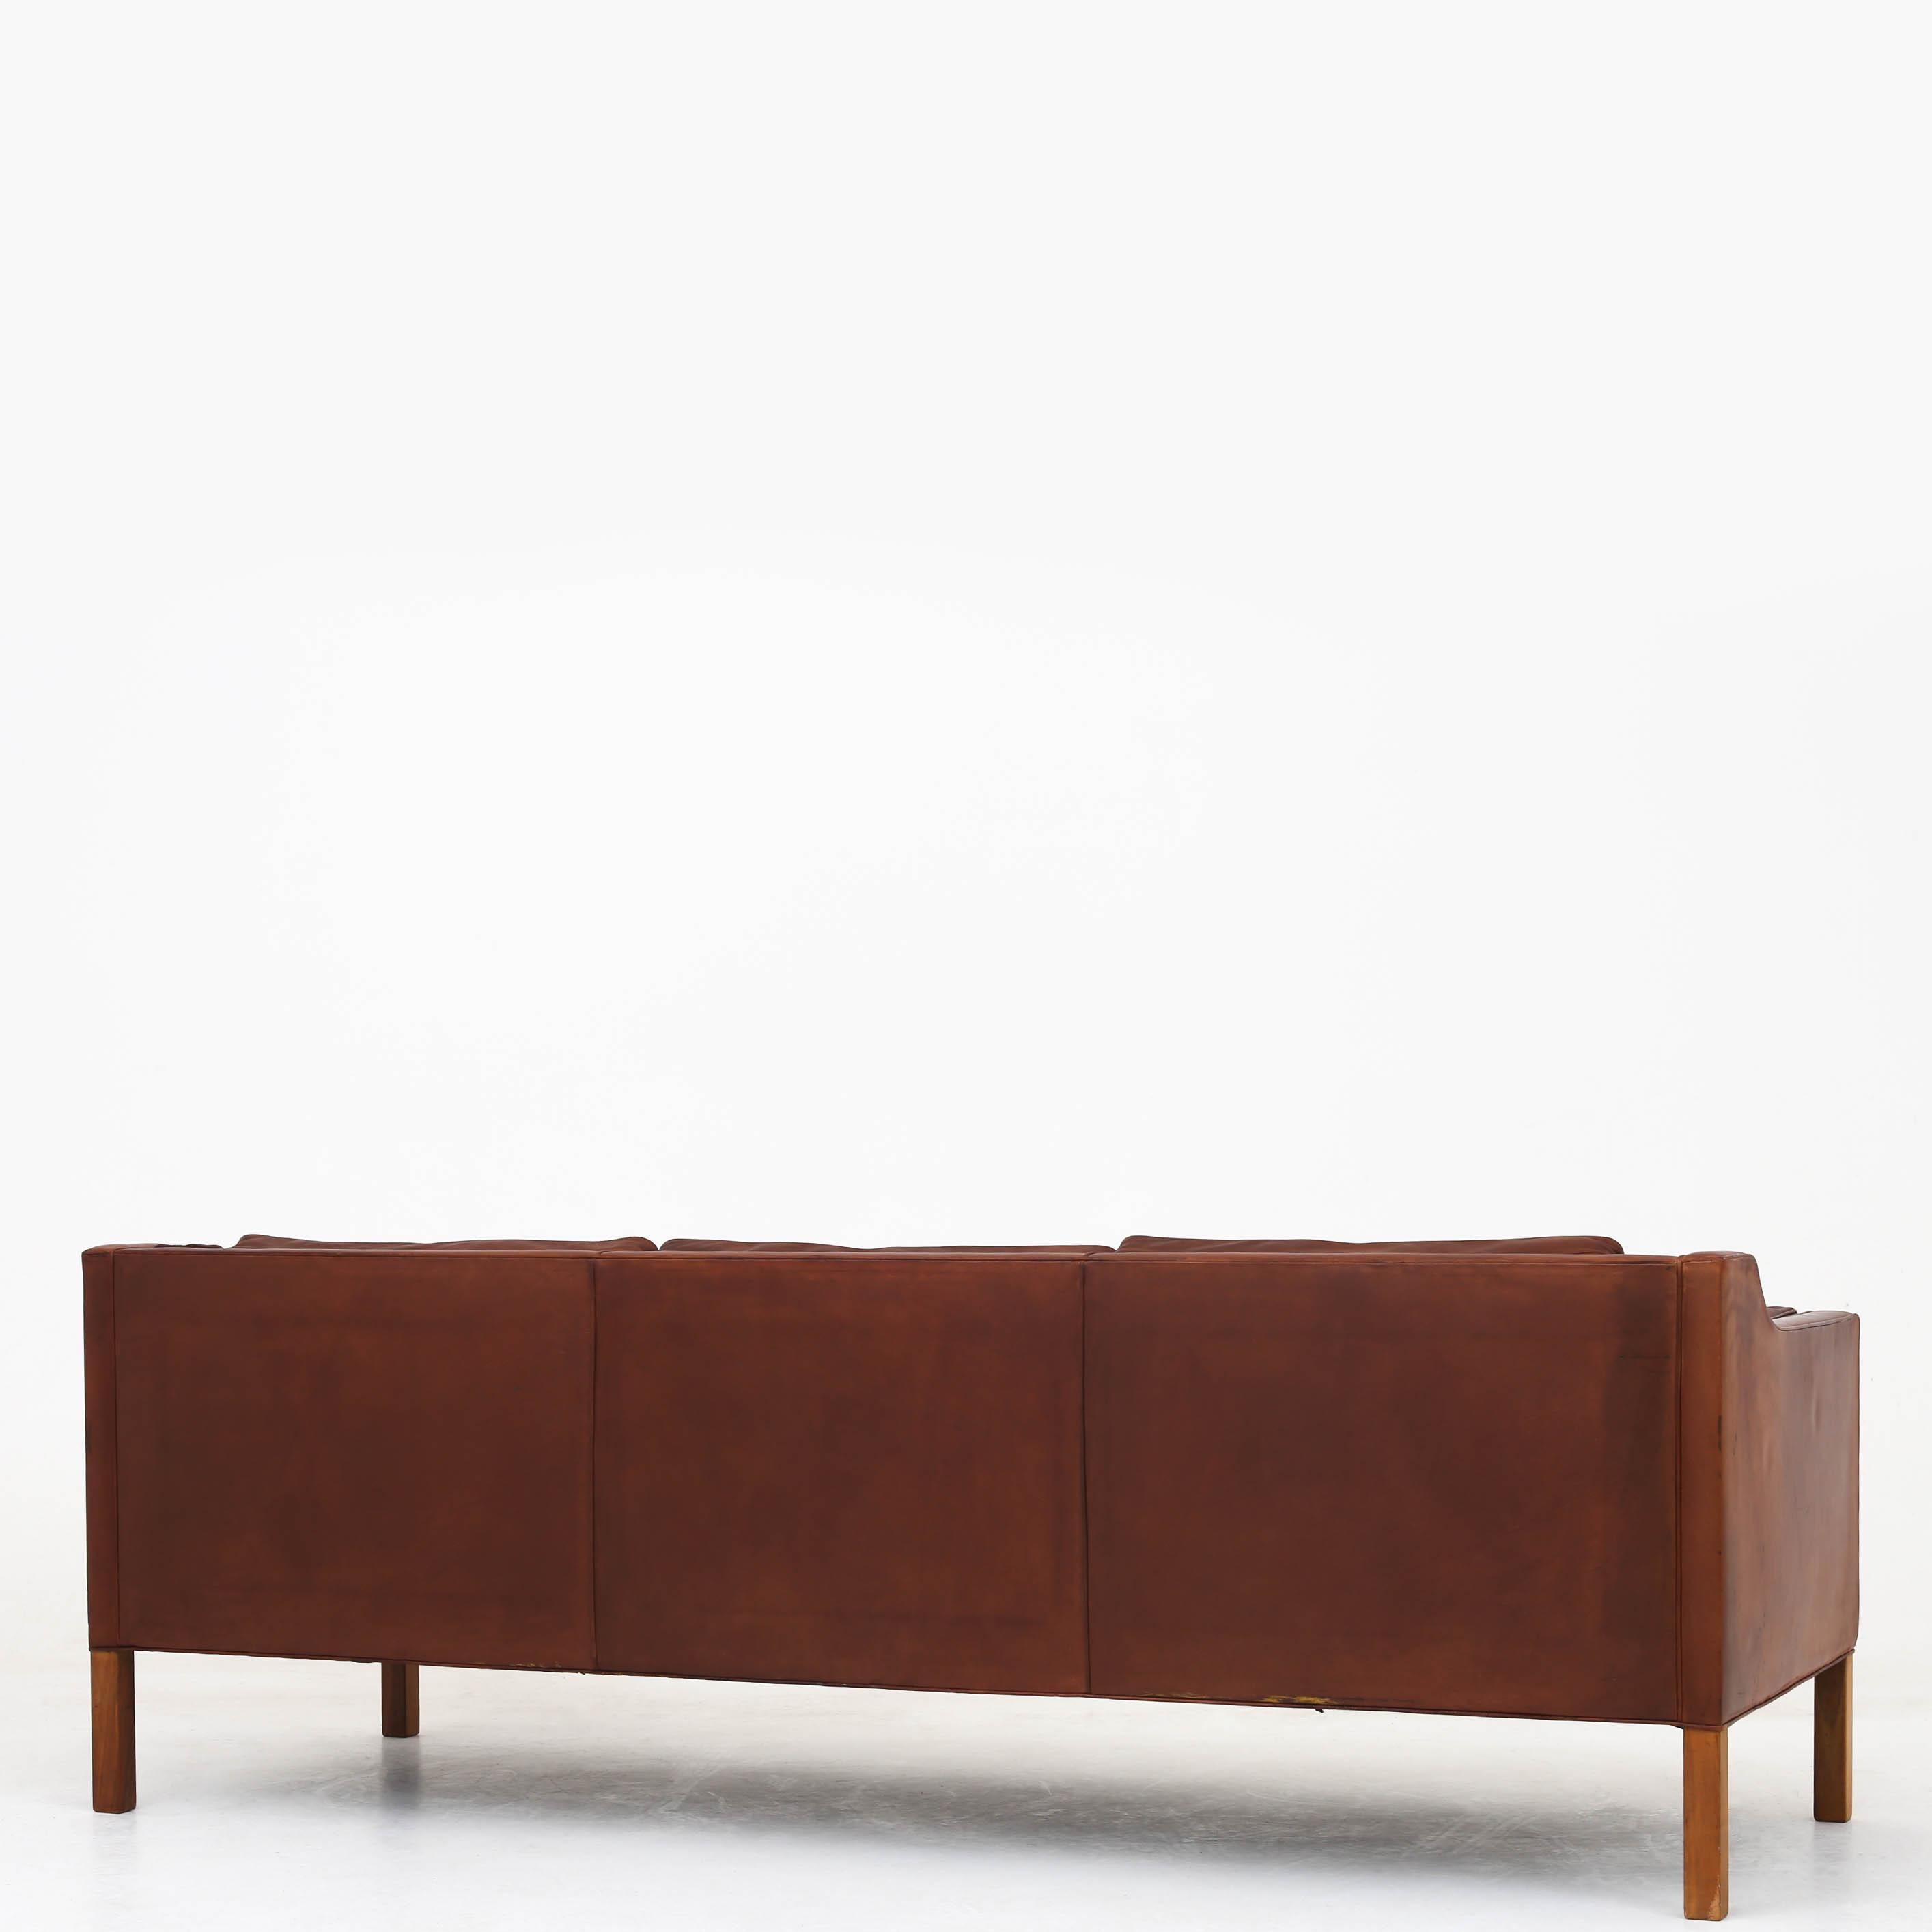 BM 2213 - 3-seater sofa in original, patinated aniline leather with down filling and legs in walnut. Maker Fredericia Furniture.